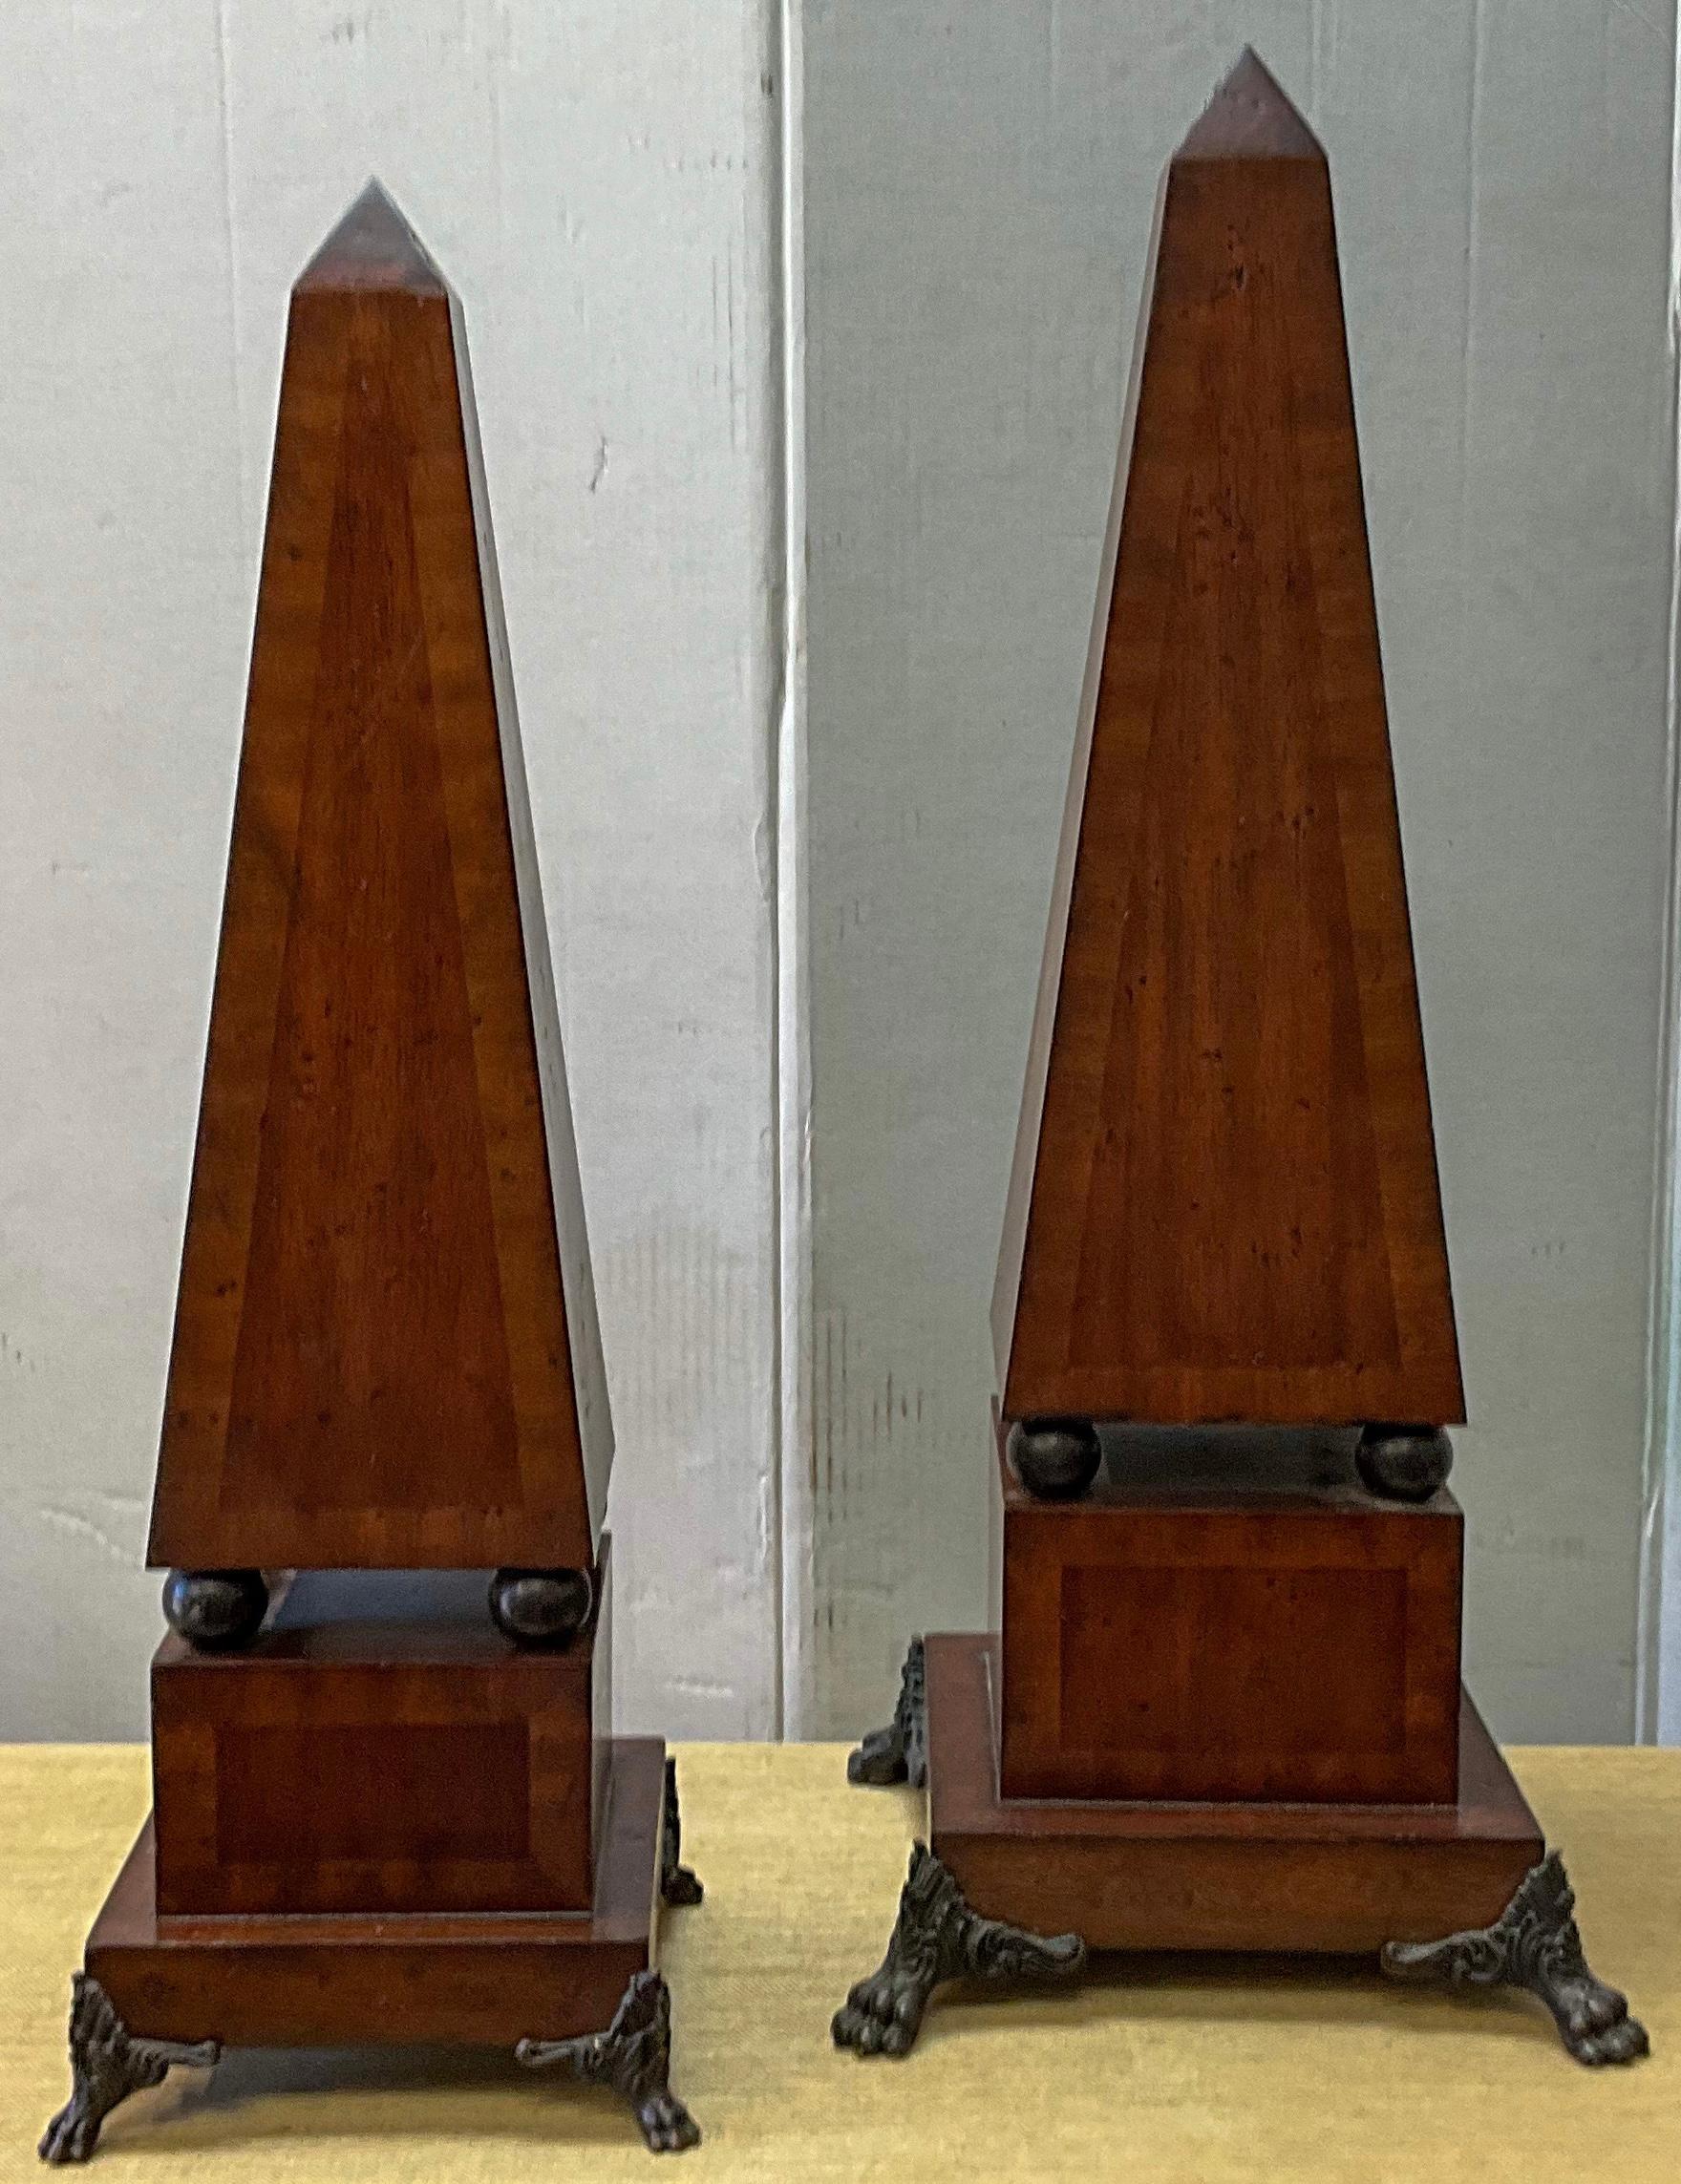 American 20th-C. Neo-Classical style Inlaid Mahogany And Bronze Obelisks - S/2 For Sale